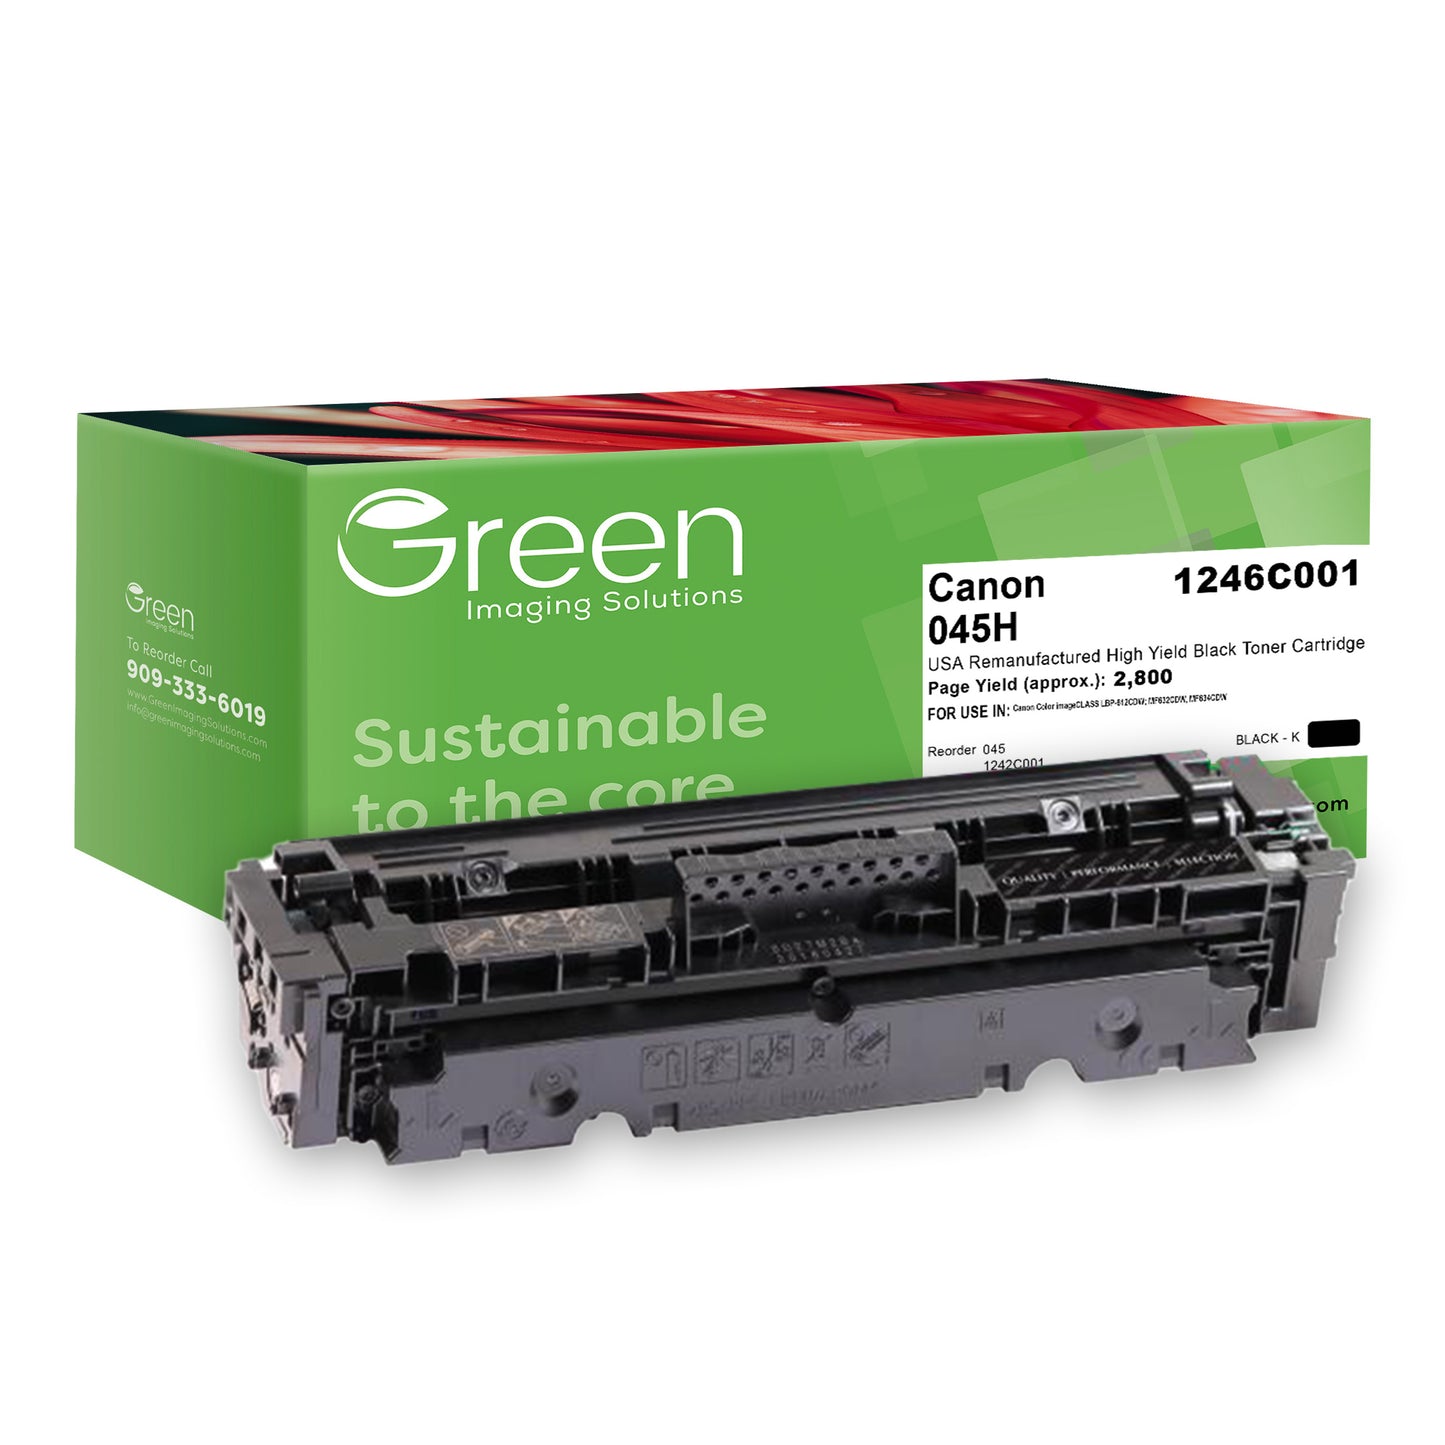 Green Imaging Solutions USA Remanufactured High Yield Black Toner Cartridge for Canon 1246C001 (045 H)